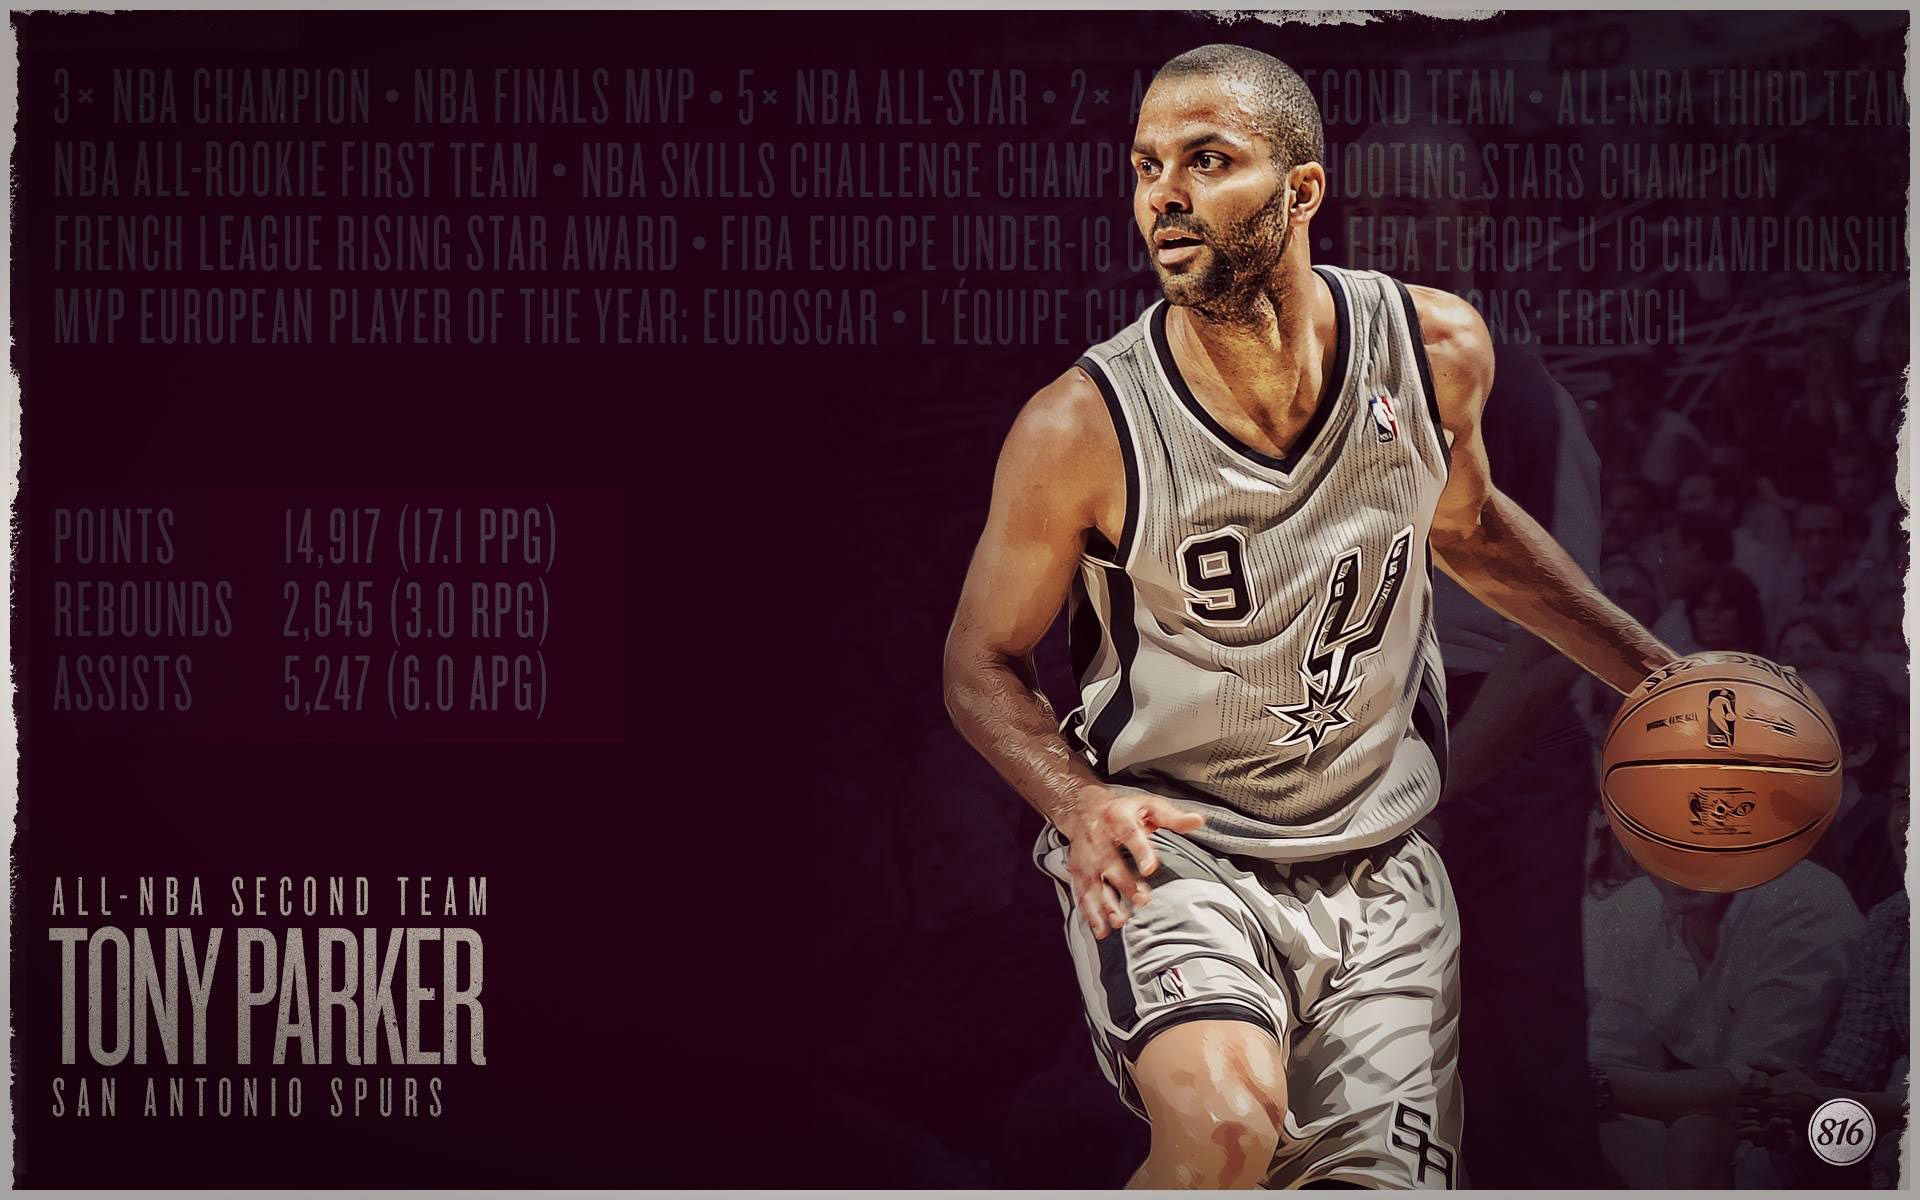 San Antonio Spurs Browser Themes, Wallpaper and More. Tony